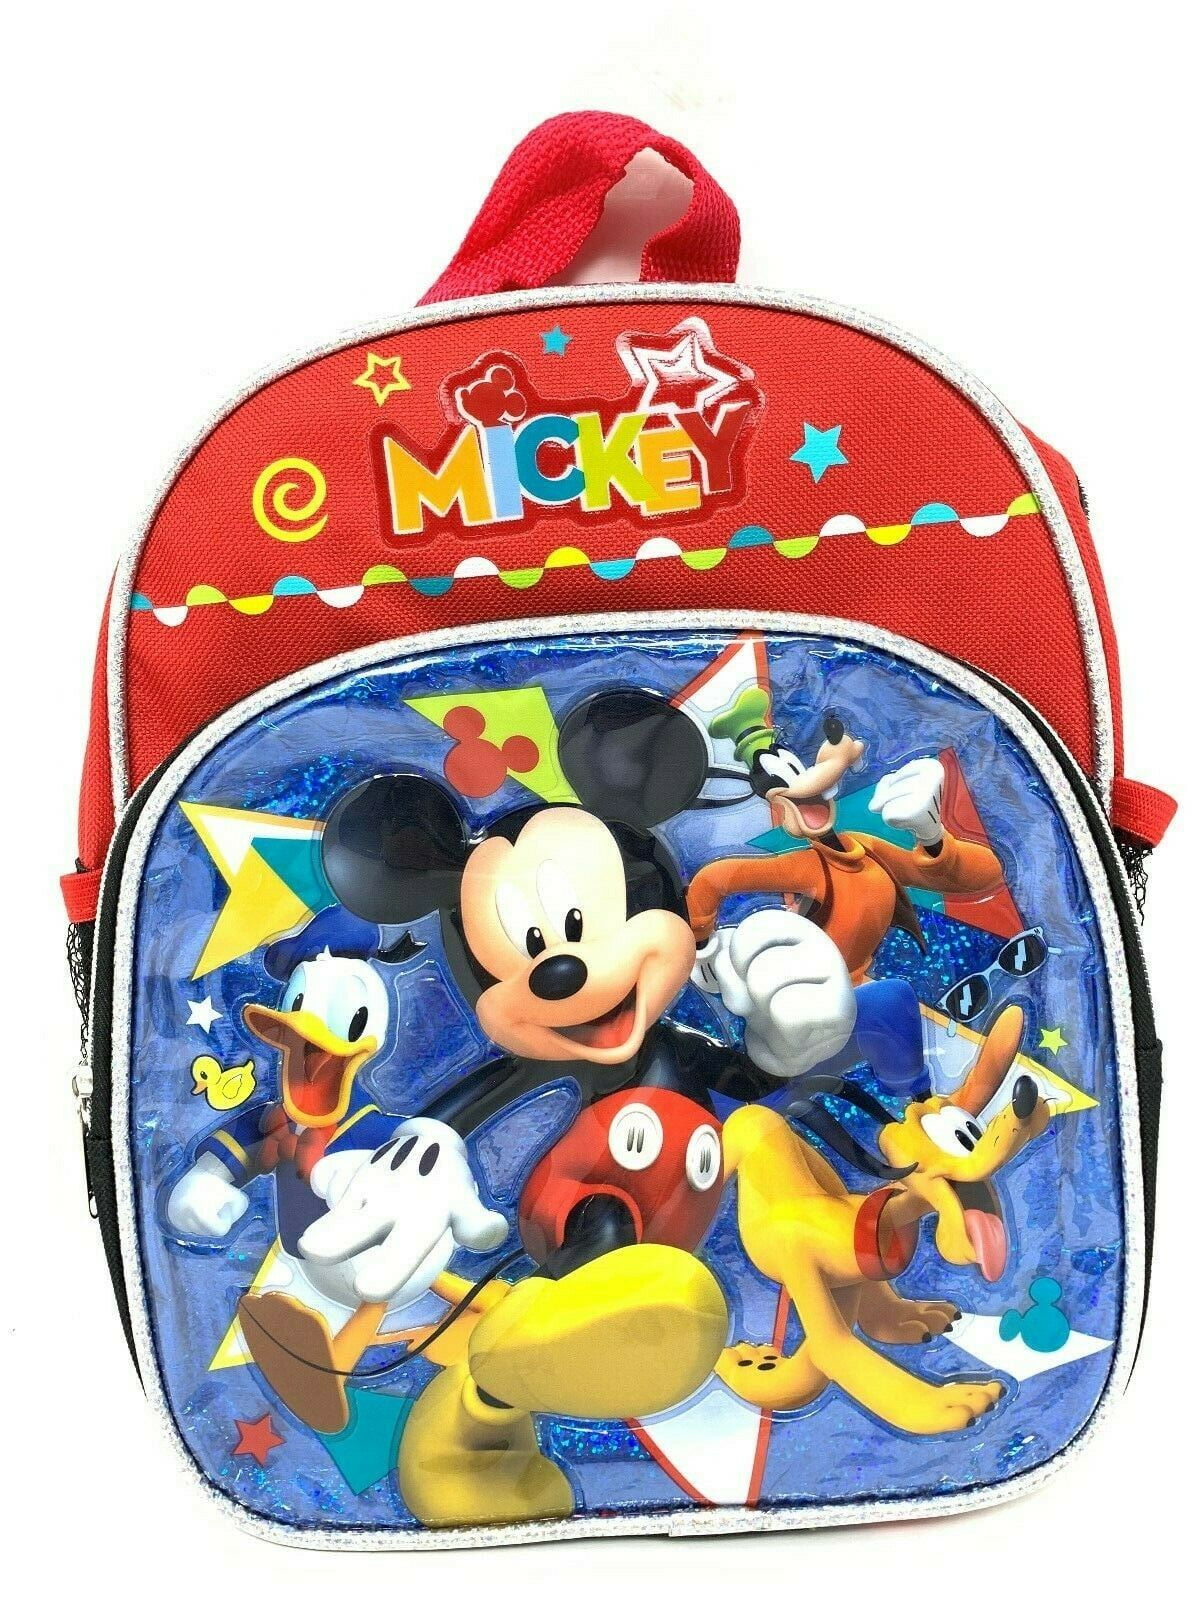 Mickey Mouse °o° Disney Pin Backpack